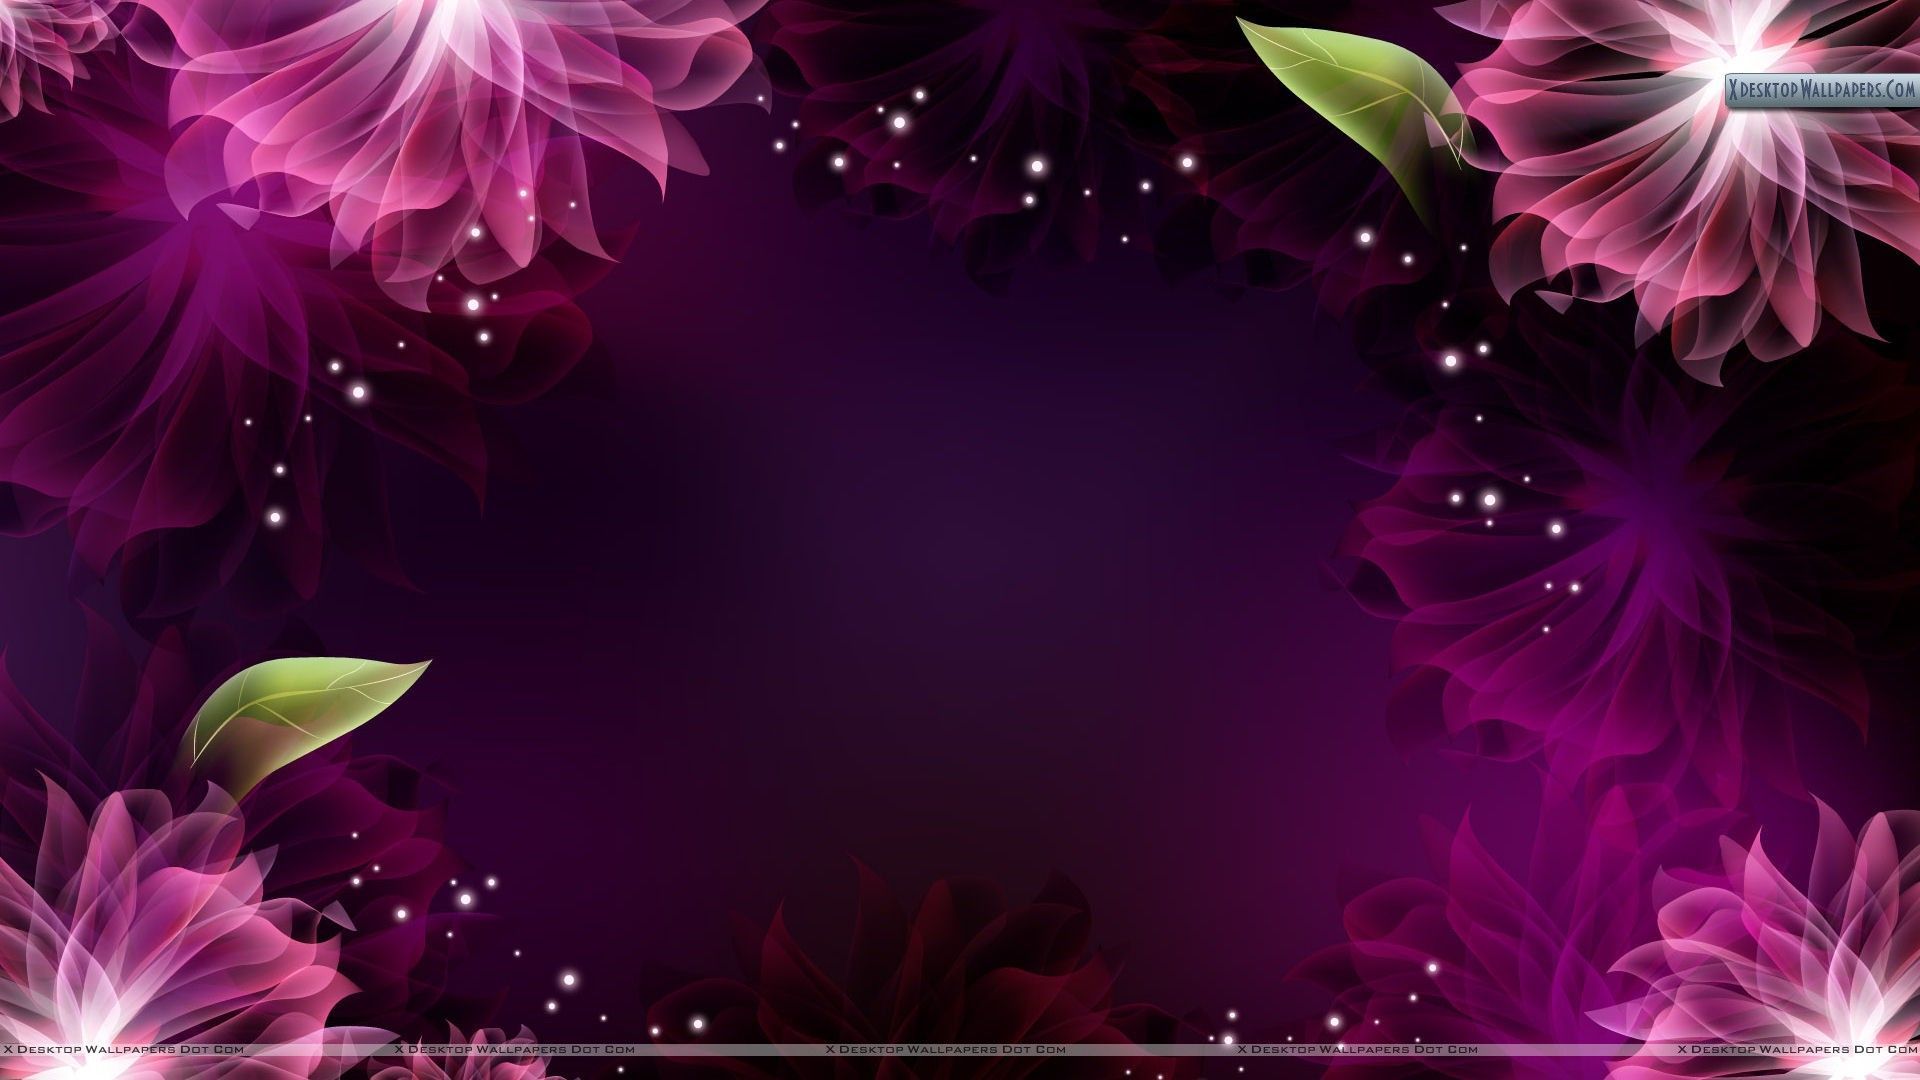 wallpapers and backgrounds,violet,pink,purple,petal,magenta